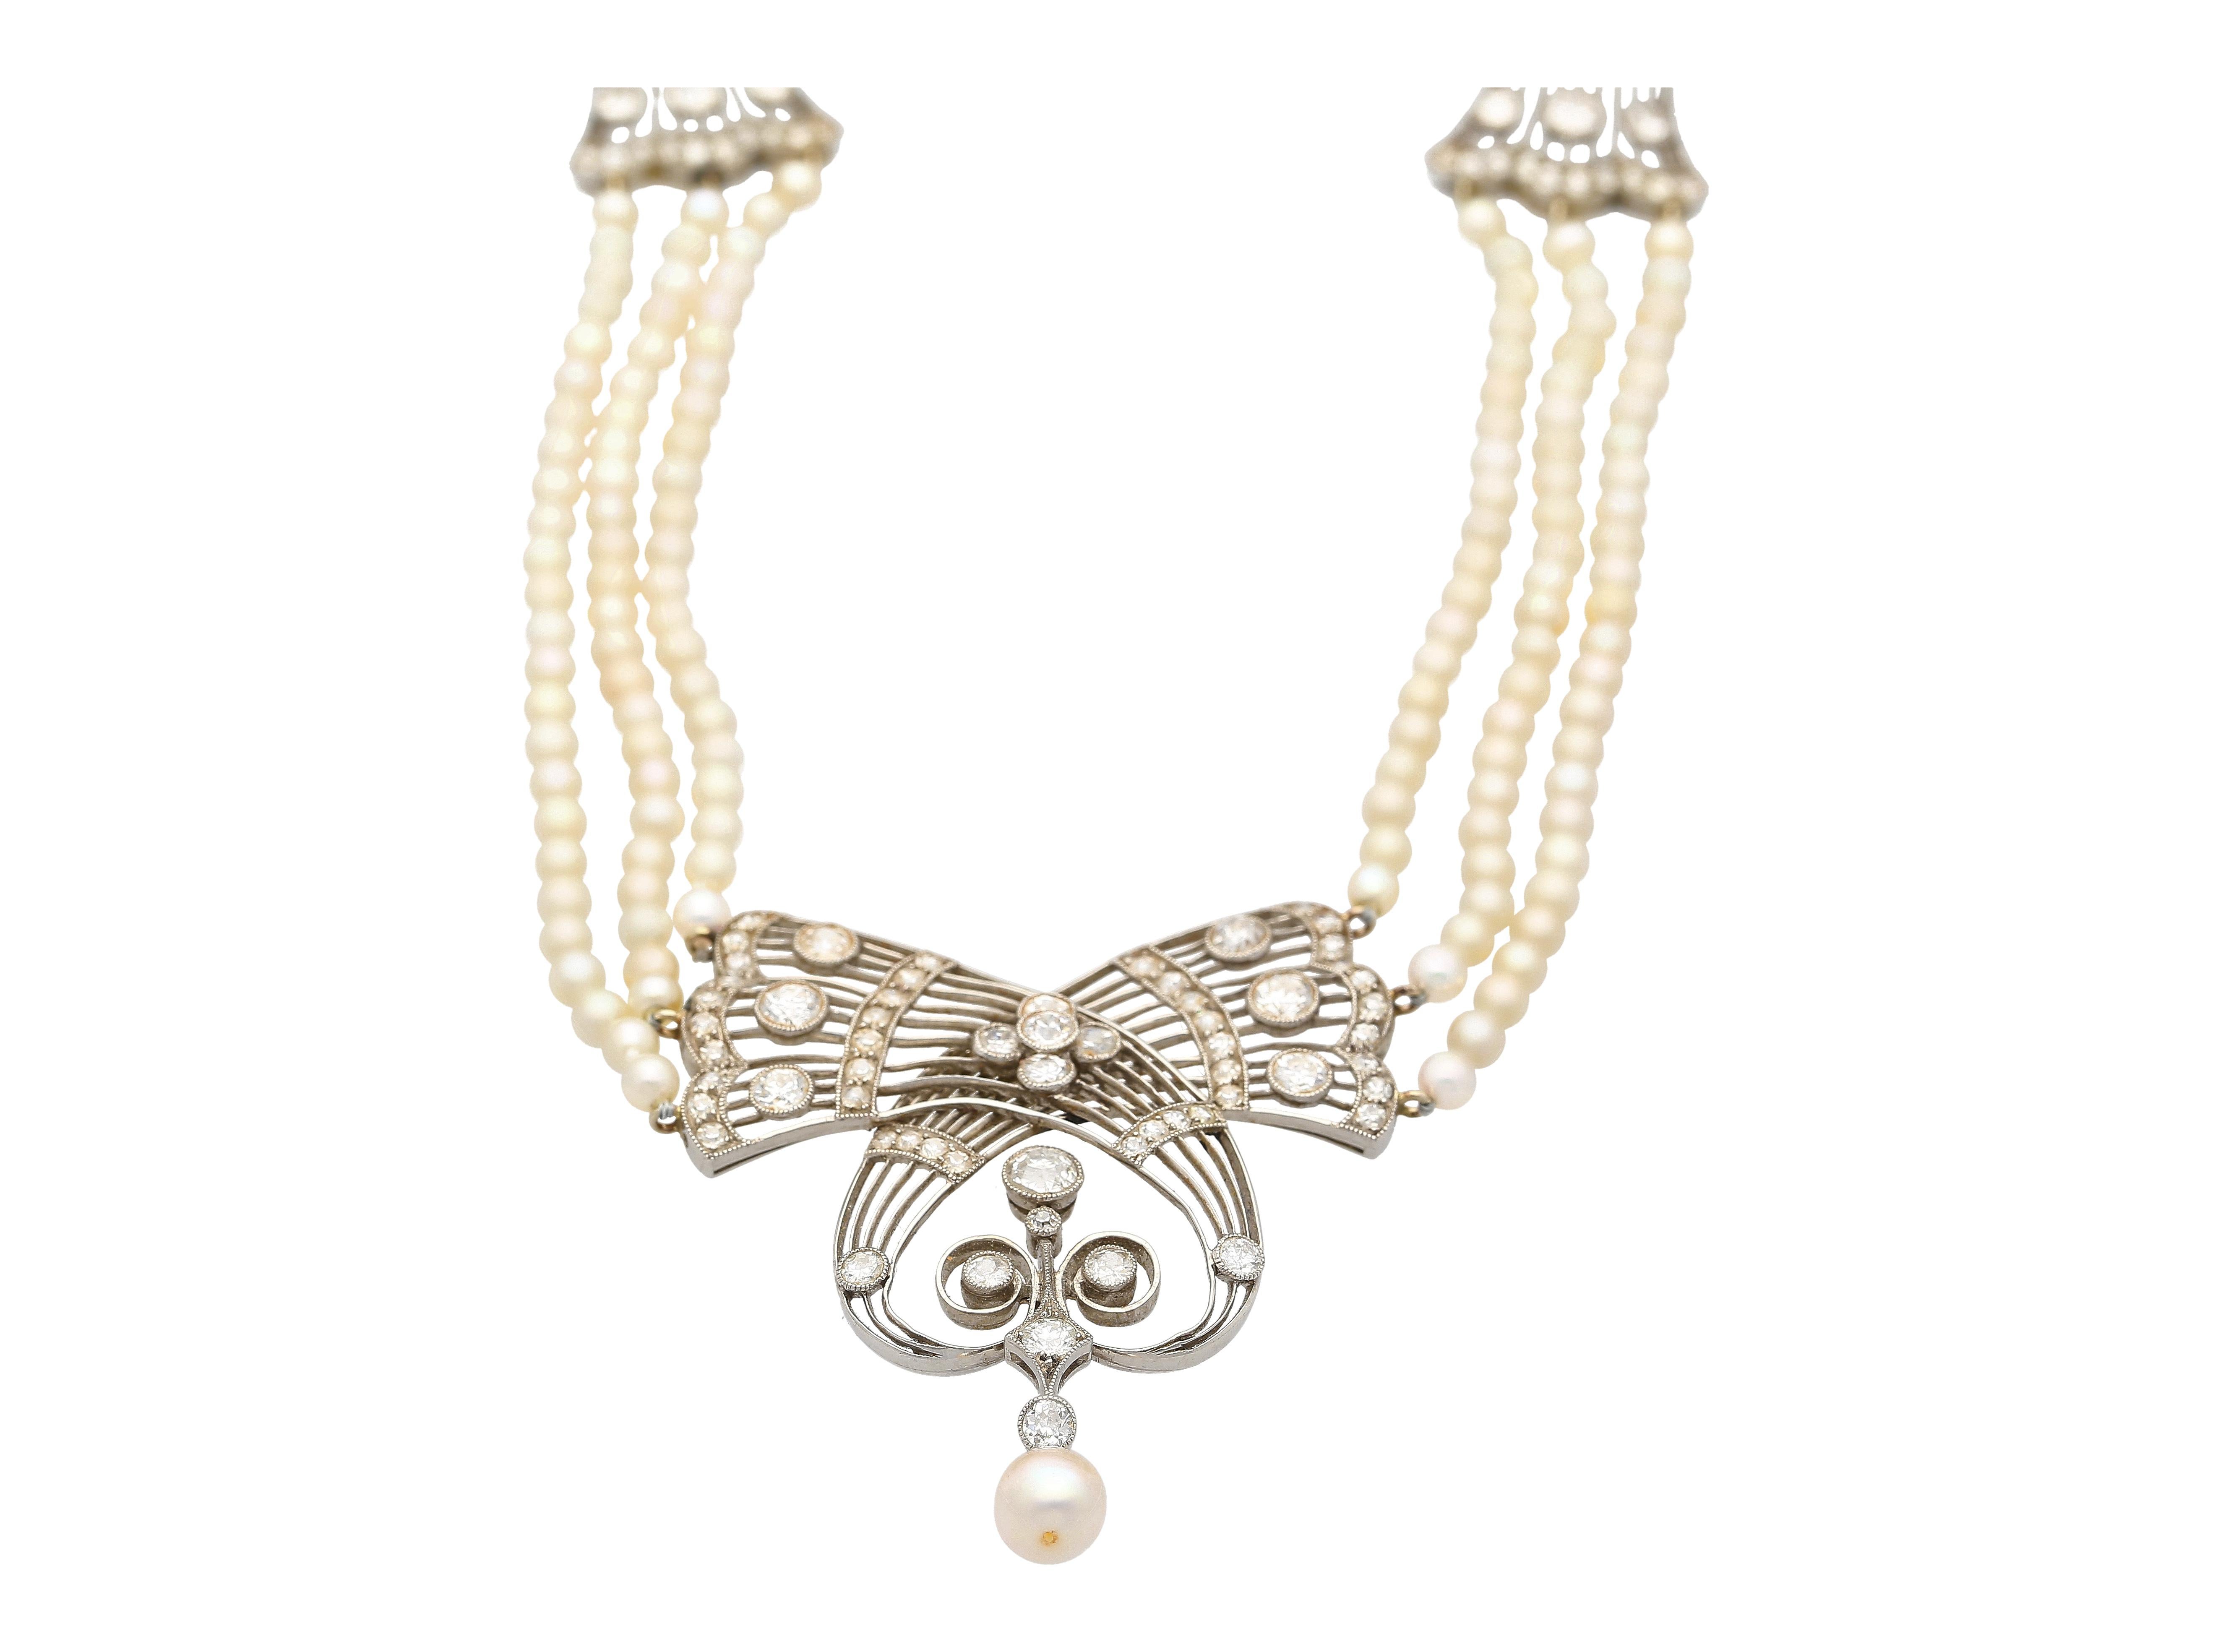 Edwardian Era GIA Certified Natural Saltwater Pearl & Old Euro Diamond Necklace For Sale 3